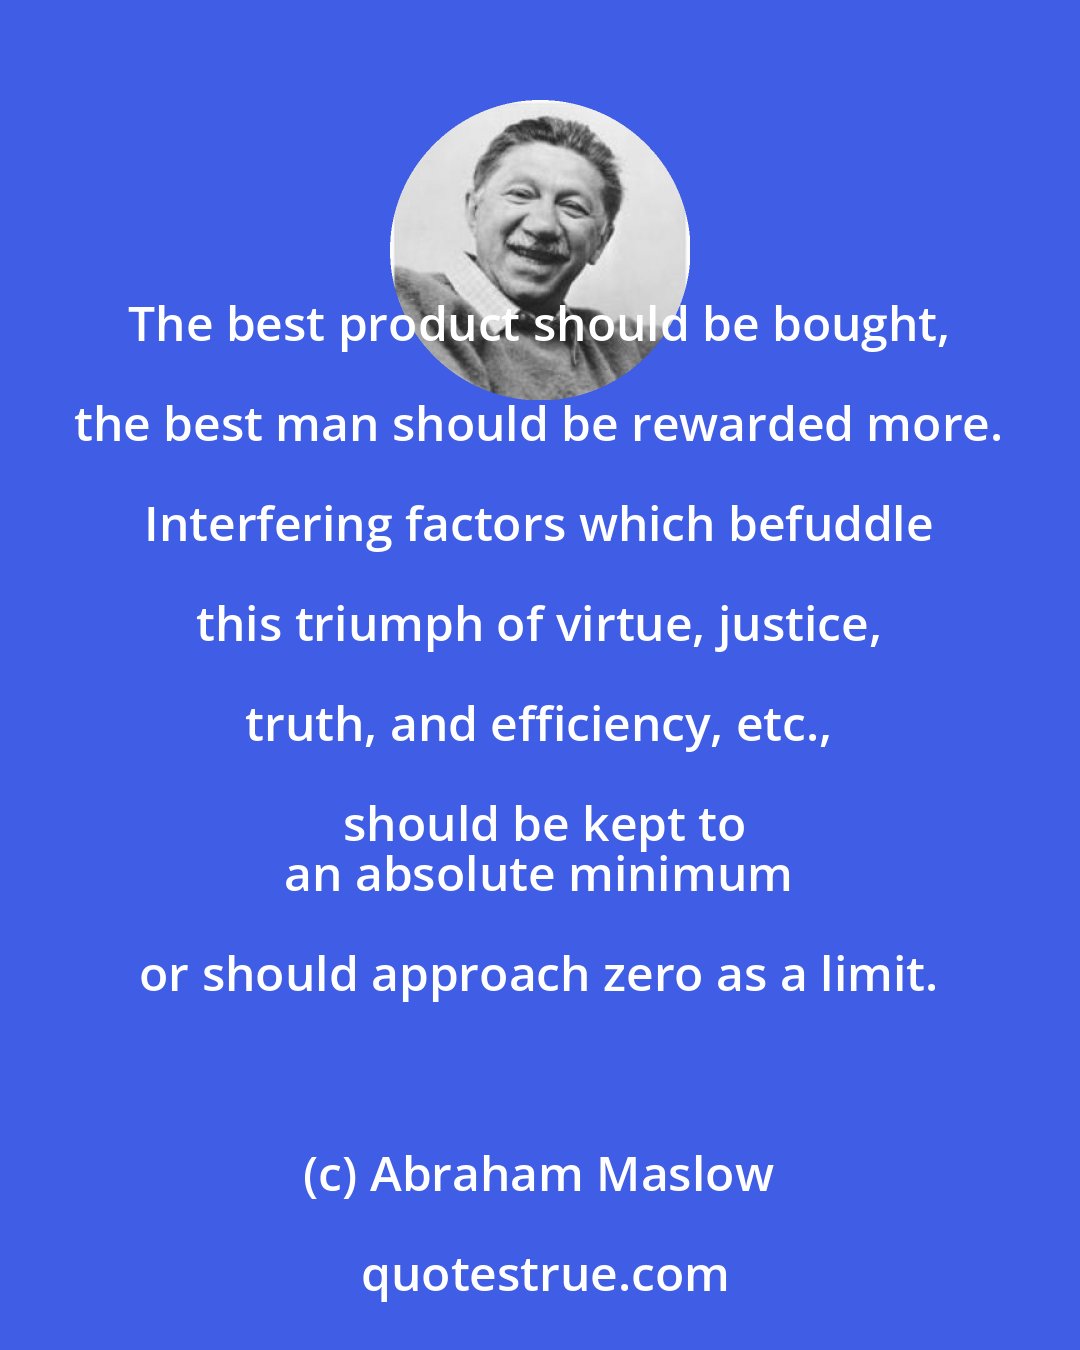 Abraham Maslow: The best product should be bought, the best man should be rewarded more. Interfering factors which befuddle this triumph of virtue, justice, truth, and efficiency, etc., should be kept to
 an absolute minimum or should approach zero as a limit.